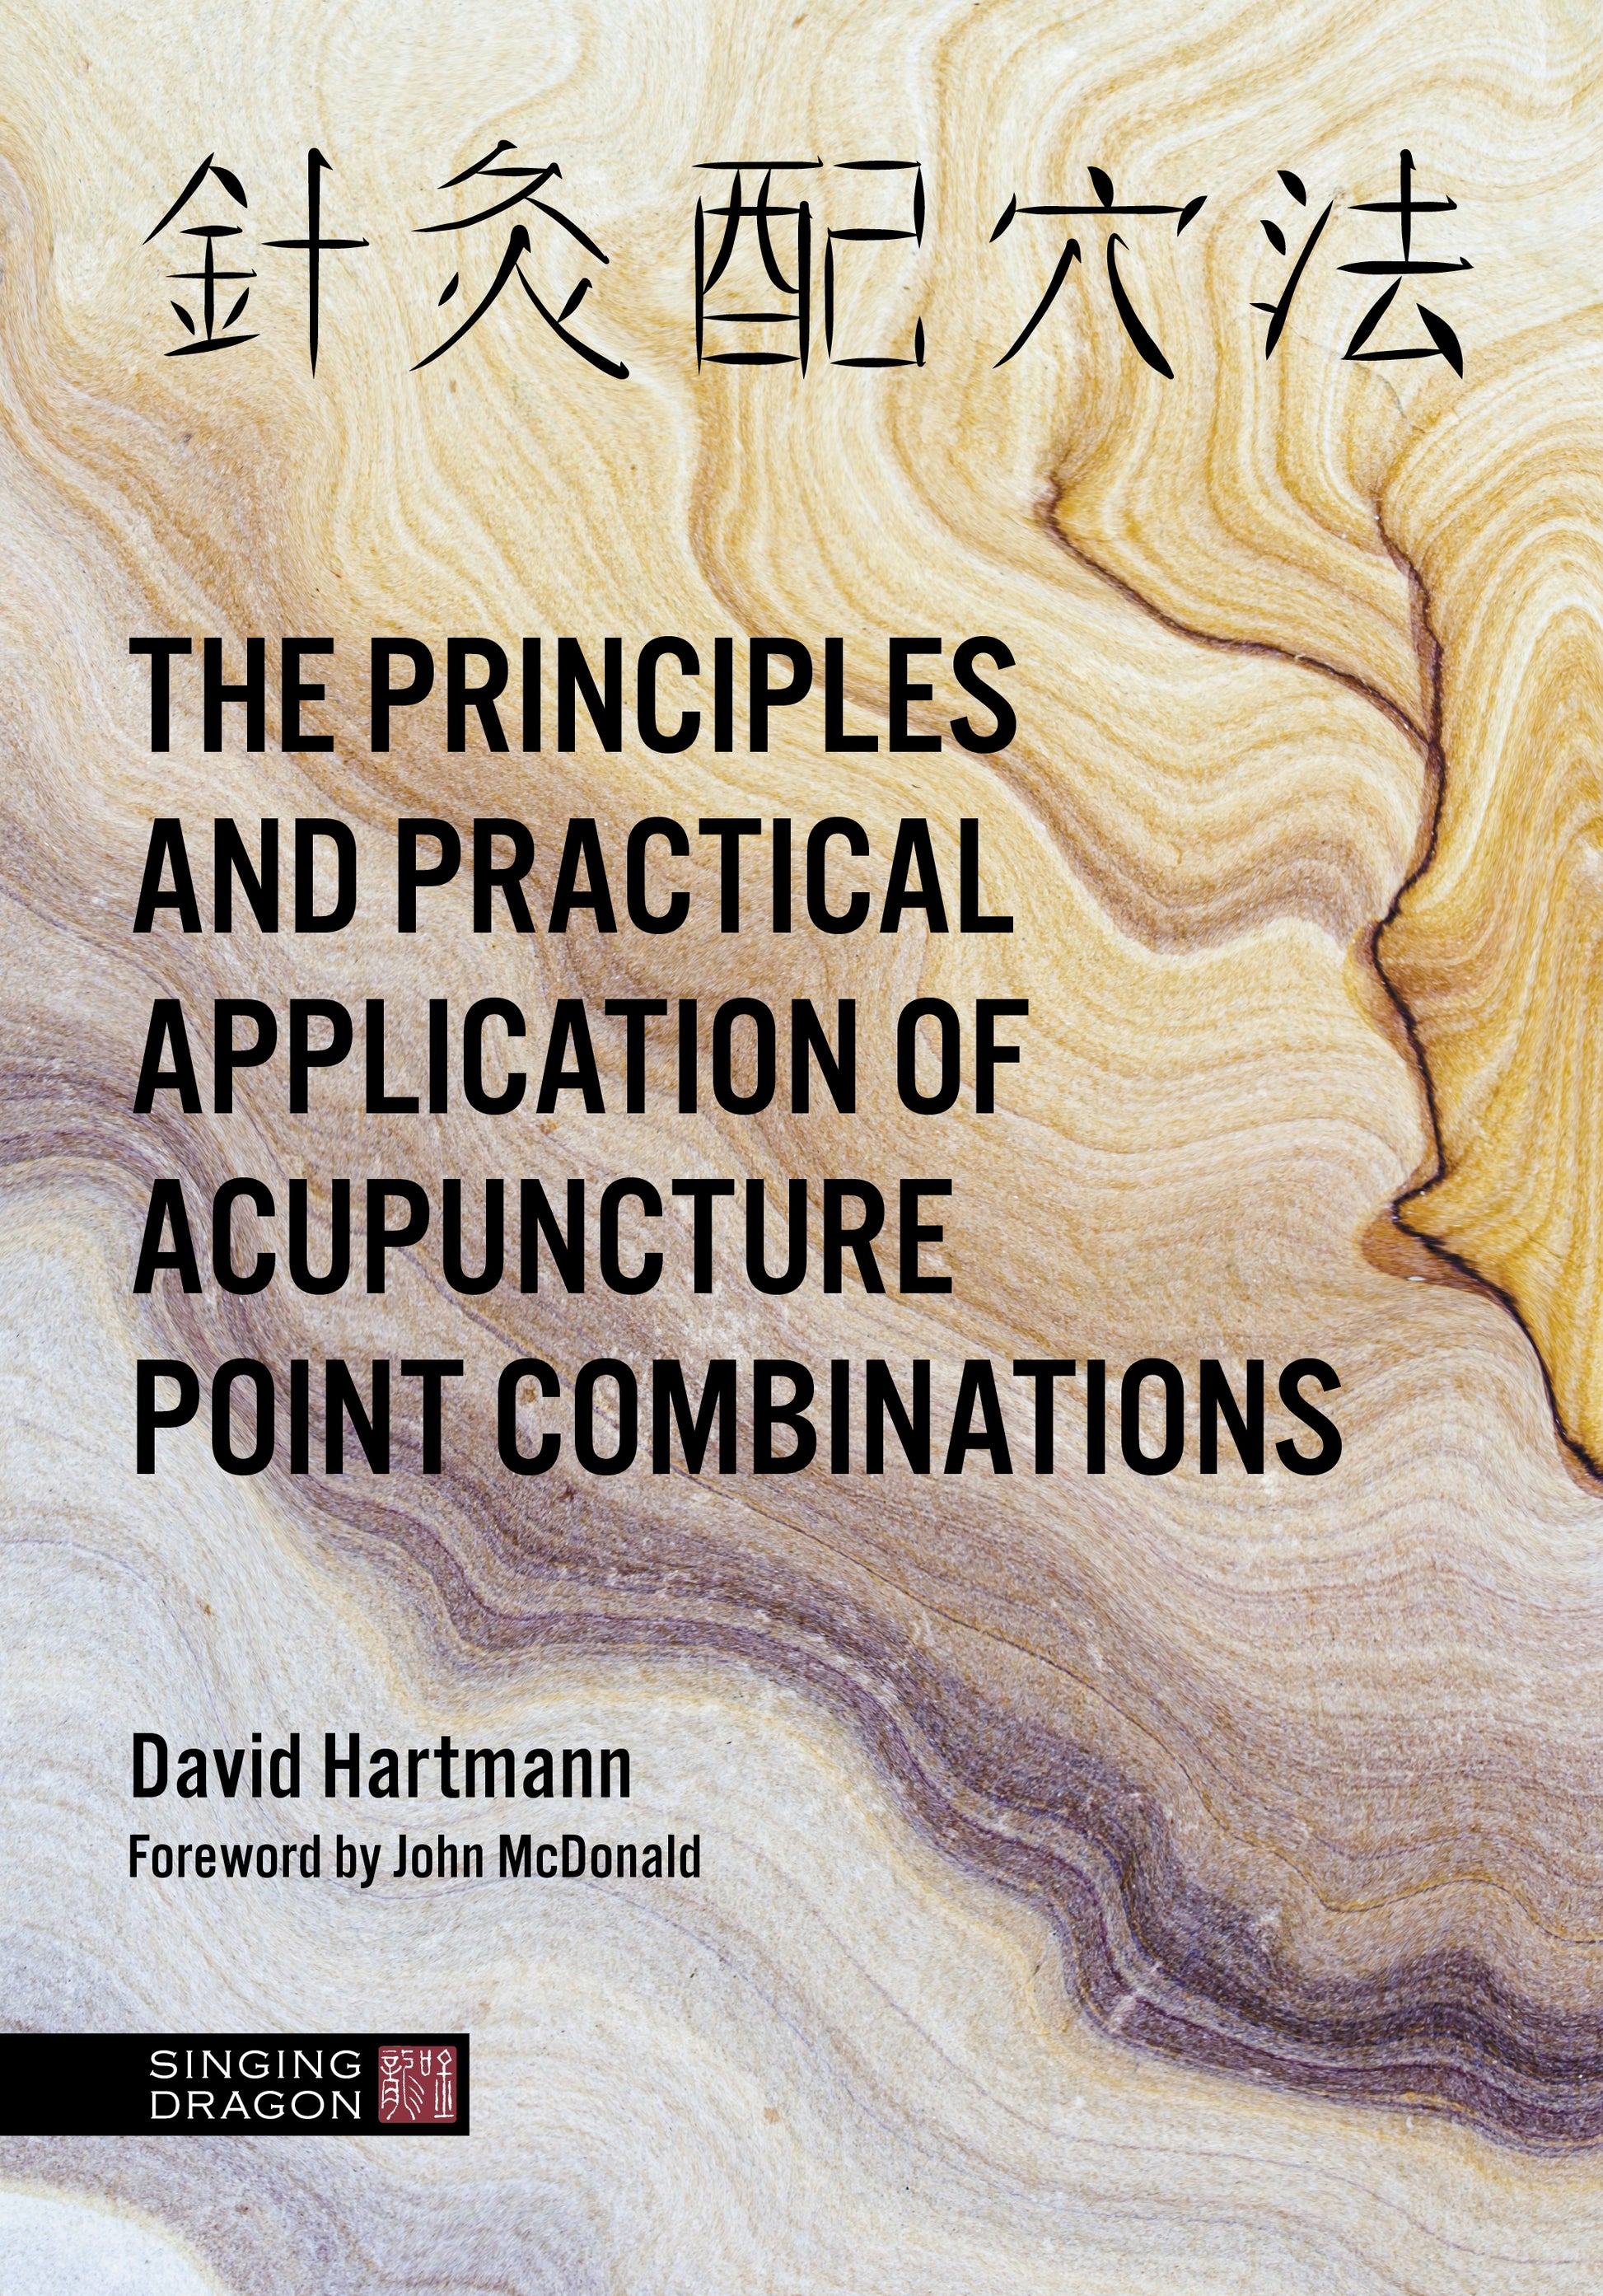 The Principles and Practical Application of Acupuncture Point Combinations by David Hartmann, John McDonald